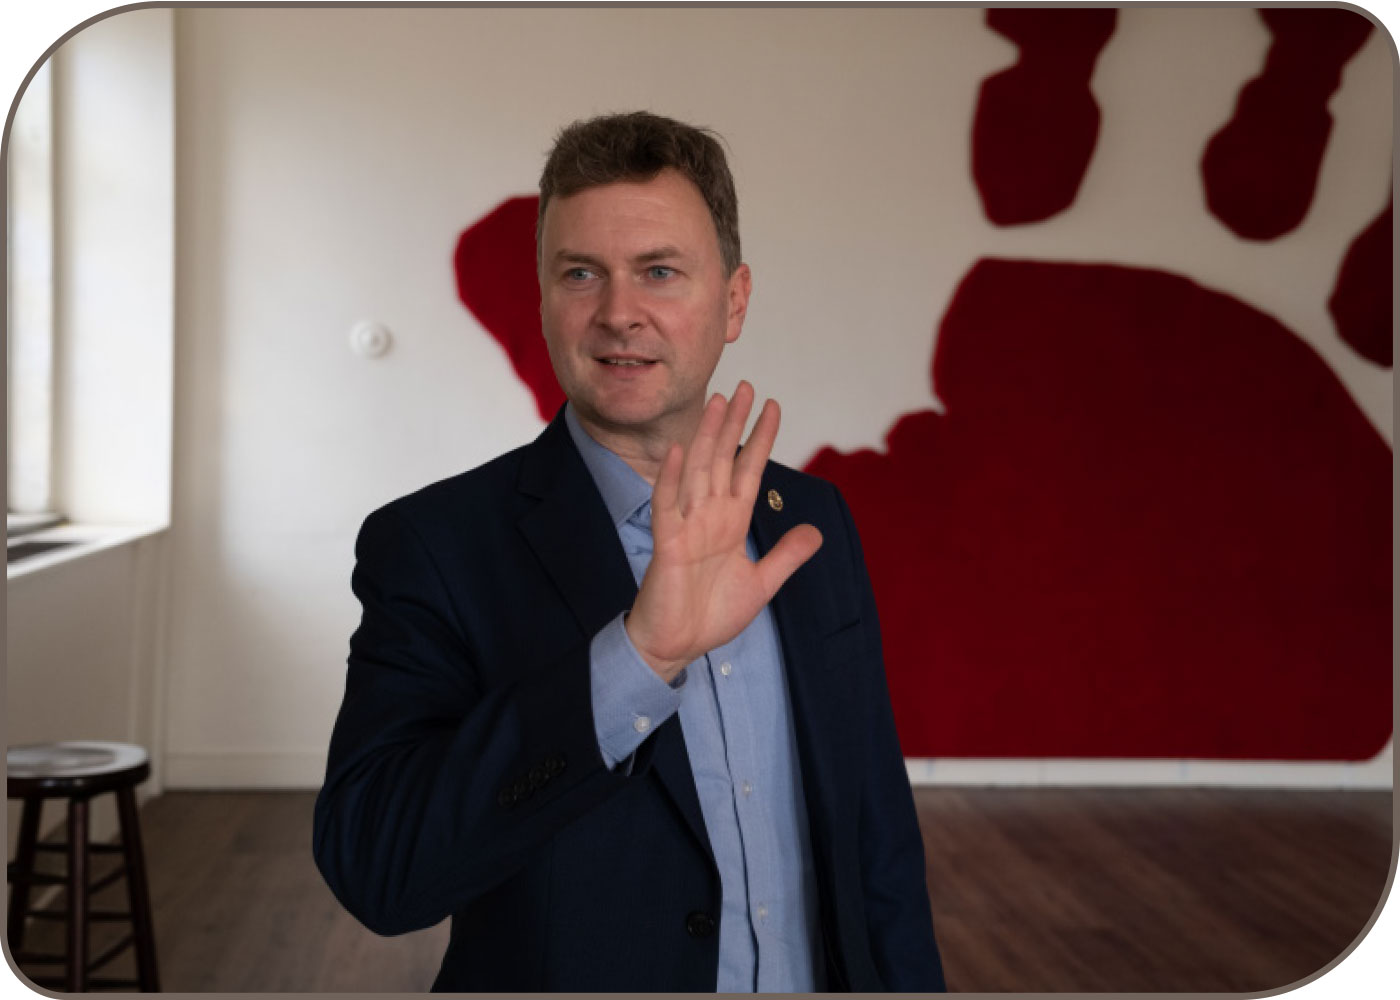 crawl space eviction improvisational actor holds his hand up in front of the hand print mural